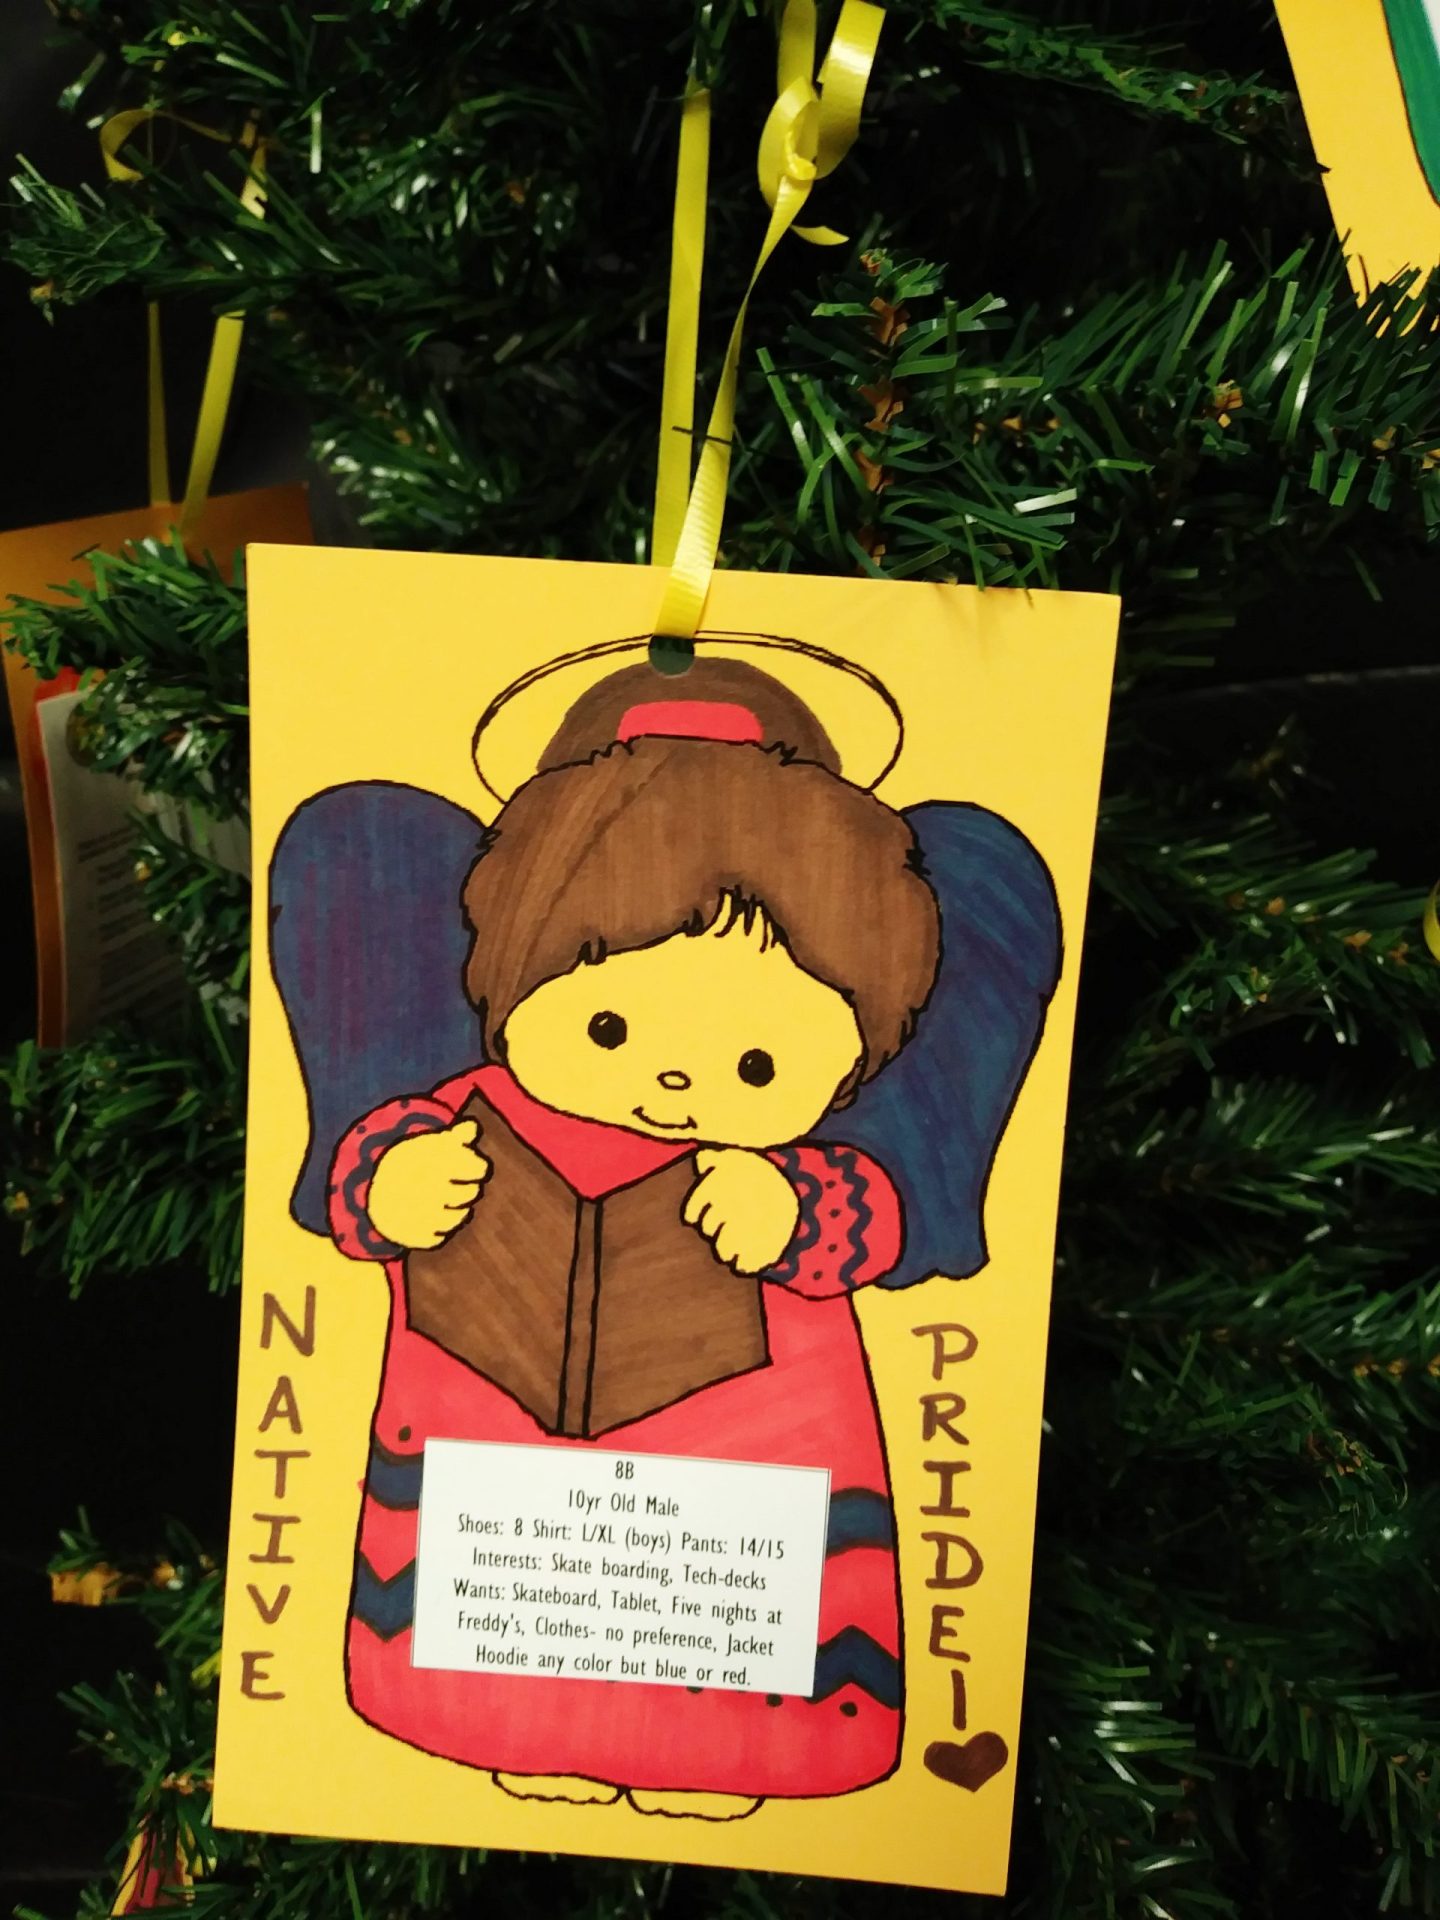 Christmas Angel Tree Program Continues at SRPMIC